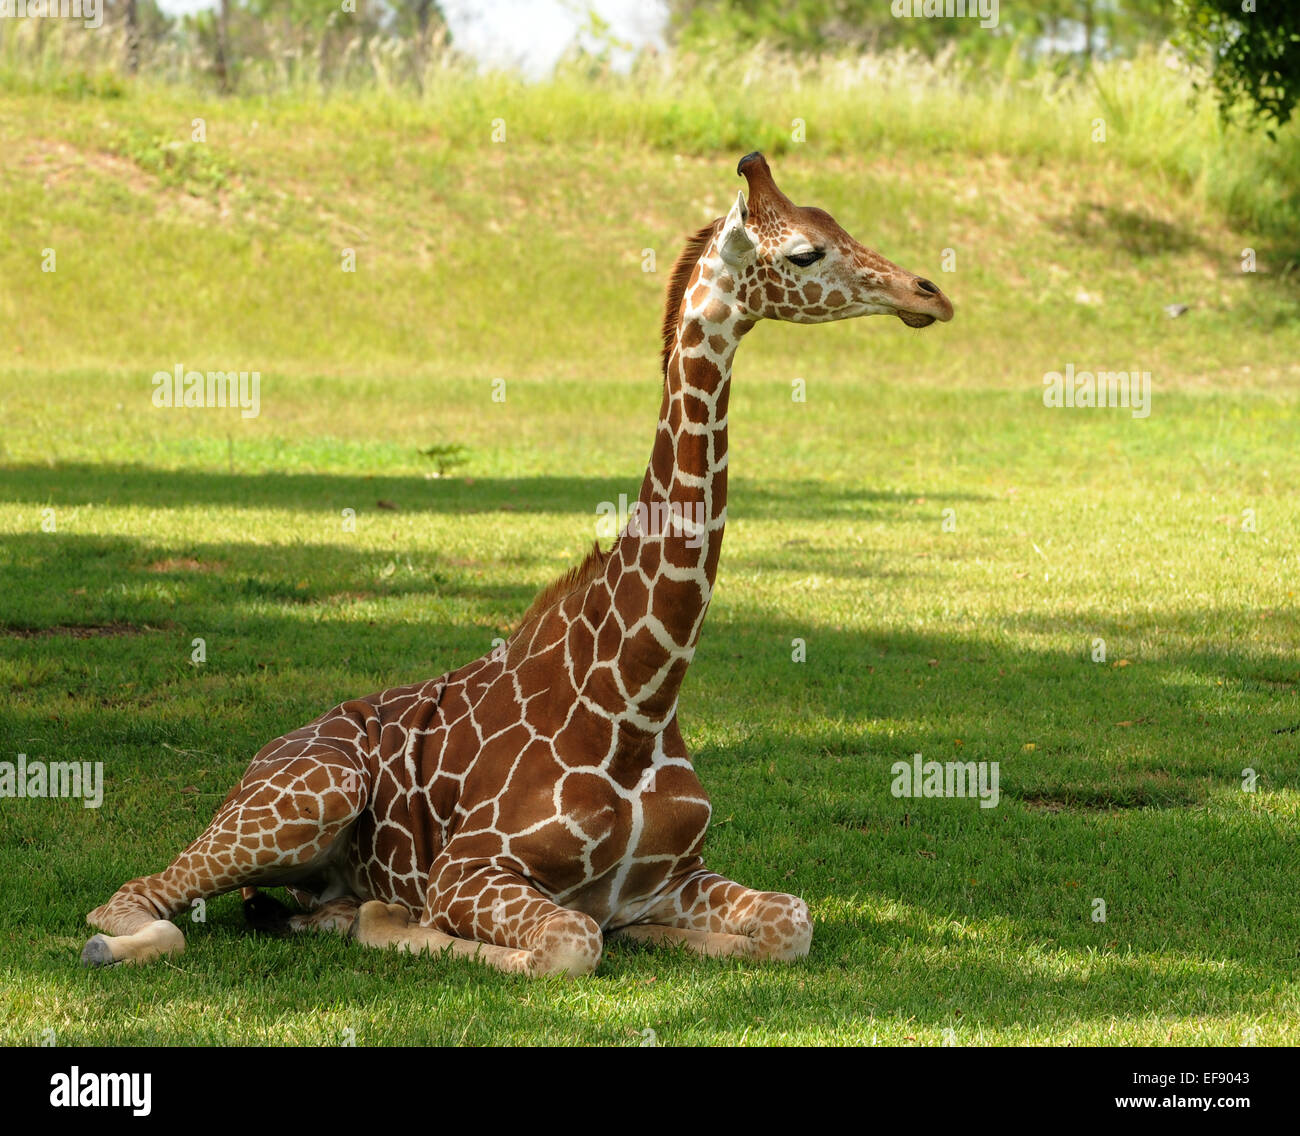 Young giraffe resting on the ground in natural habitat Stock Photo